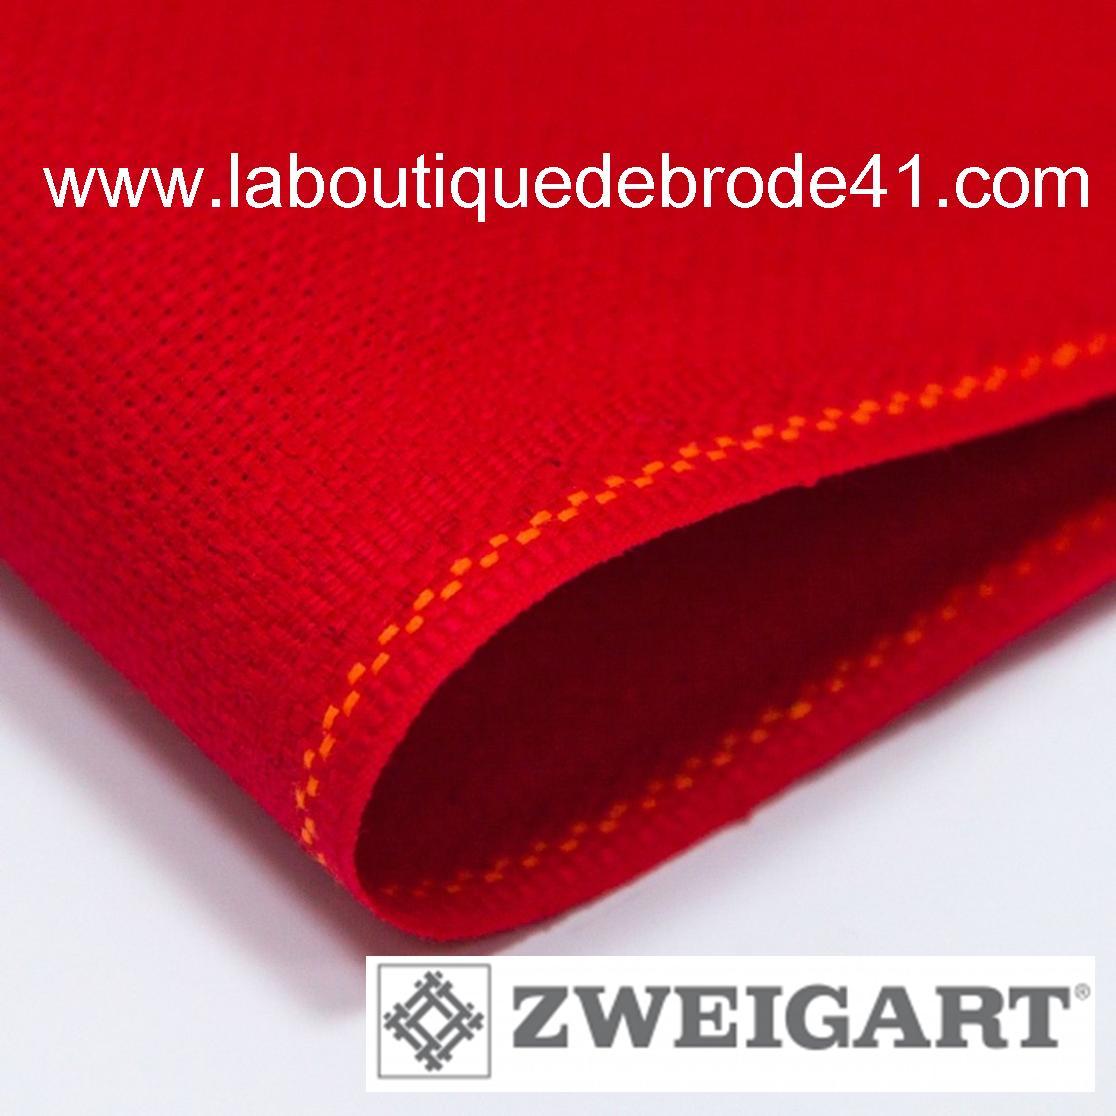 Toile a broder zweigart aida 5 4 pts 3706 rouge 955